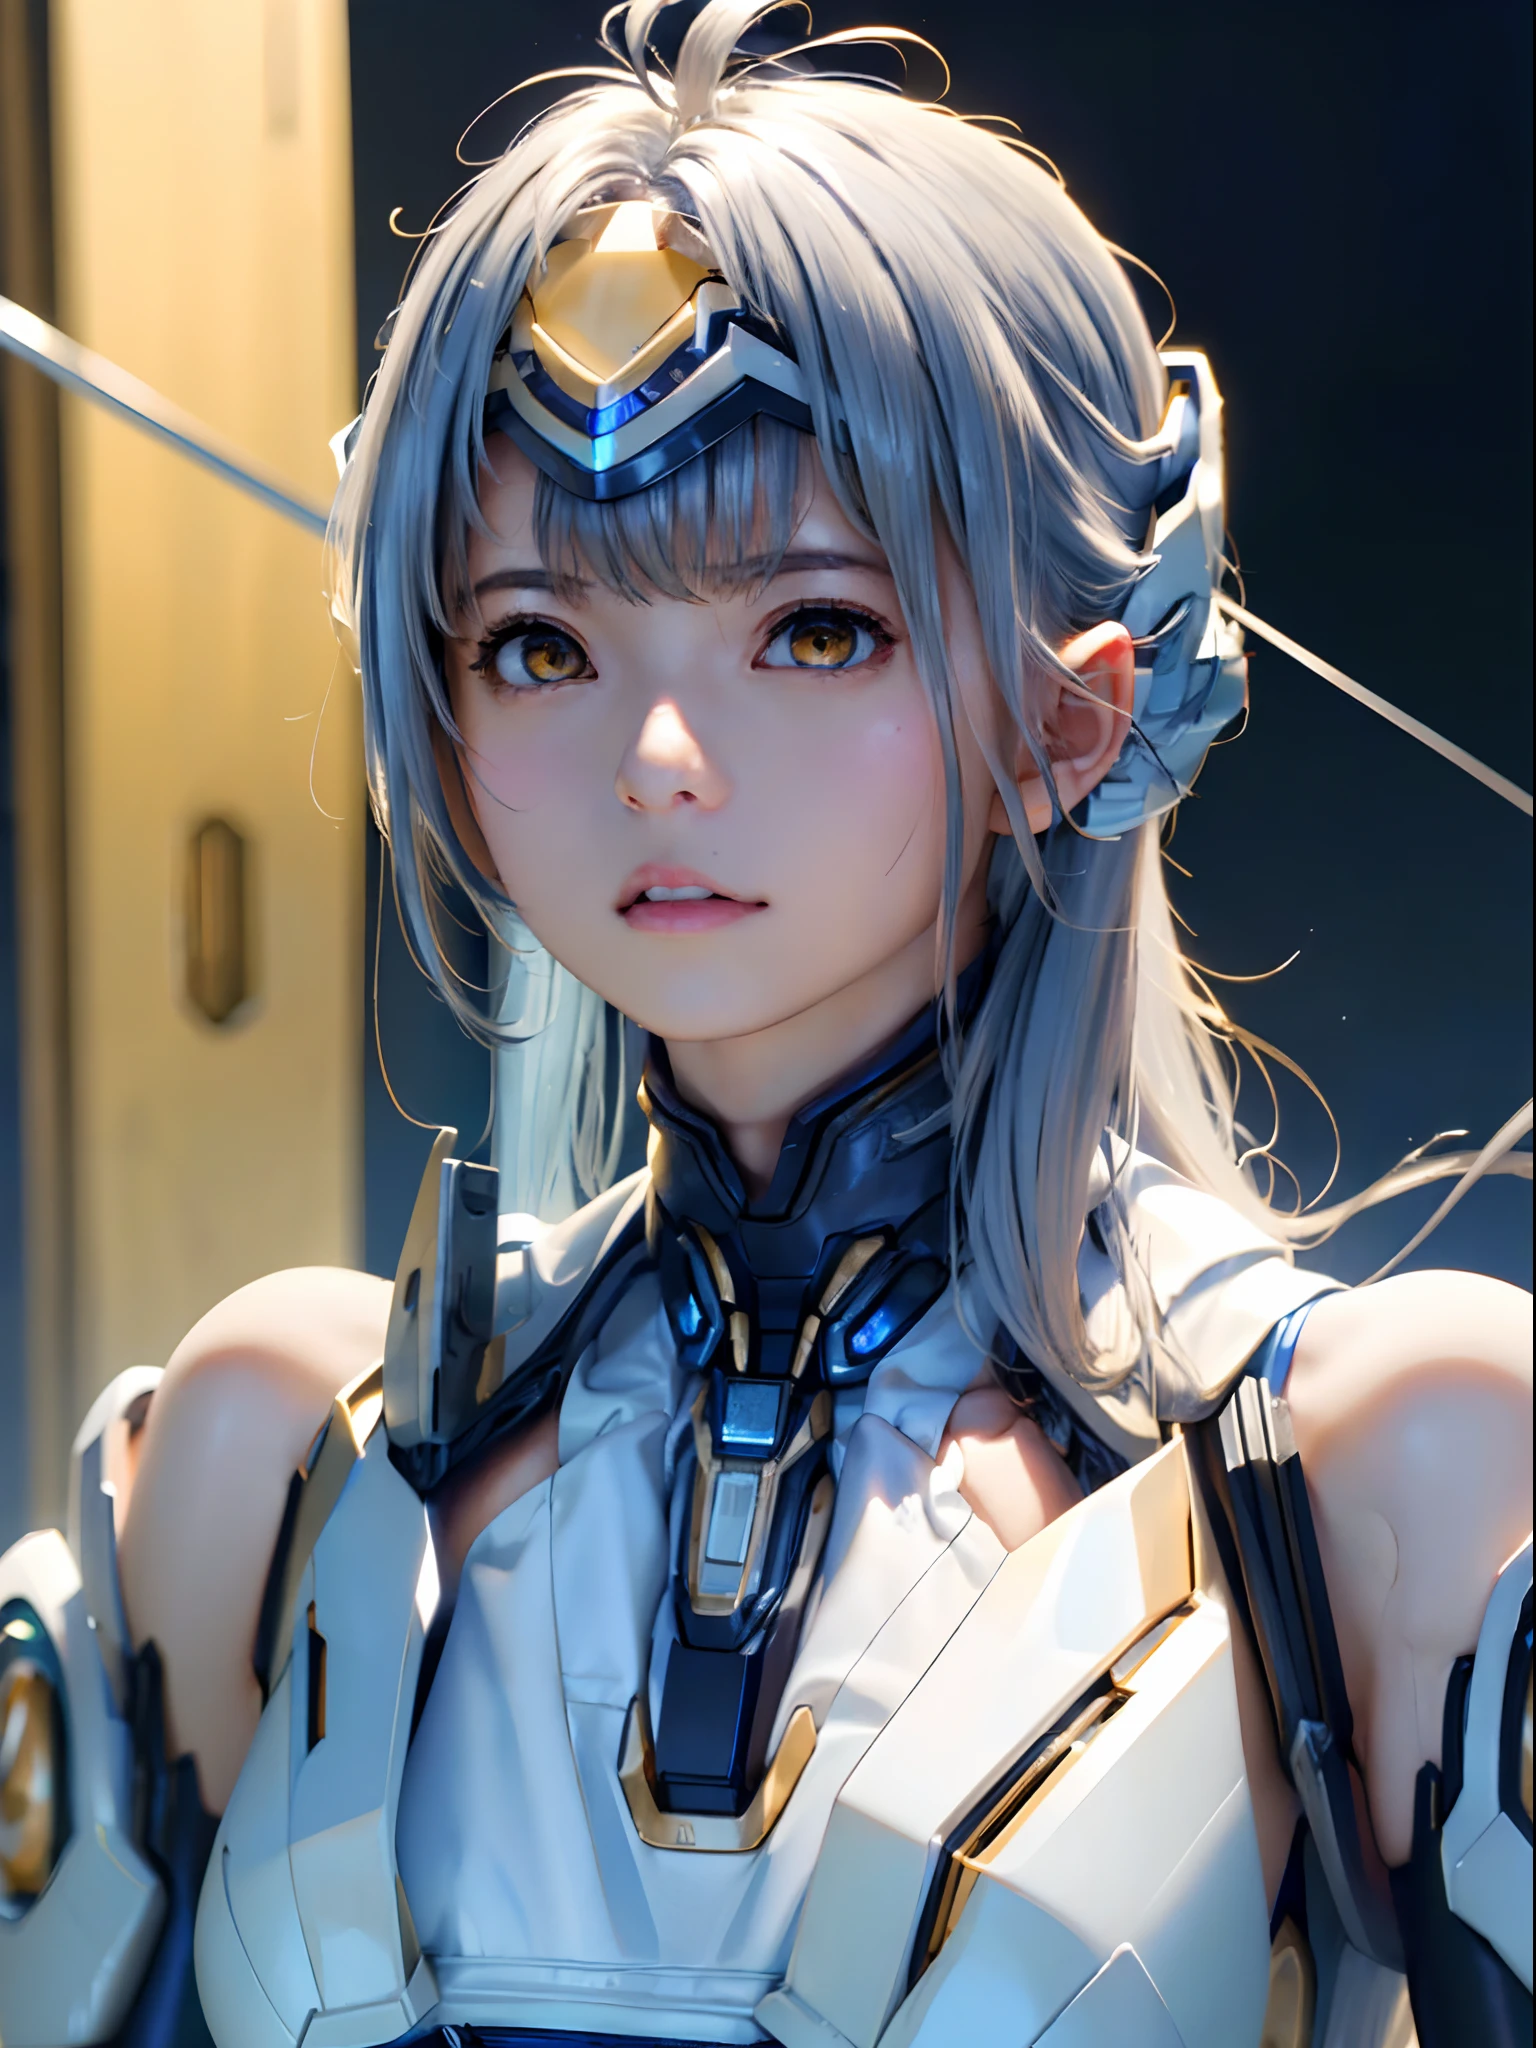 top-quality、​masterpiece、超A high resolution、(Photorealsitic:1.4)、女の子1人、Light blue hair、Straight hair, shiny and clean hair、White shiny skin、Sexy Cyberpunk Girl、((super realistic details))、Shadow、octan render、ultrasharp、hyperdetailed face、Fiberglass、Luminous tube、highly intricate detail、Realistic light、CGSoation Trends、((Golden Eyes))、(Facing the camera)、neon details、Mechanical limbechanical vertebrae attached to the back、mechanical cervical attaching to neck、Wires and cables connecting to the head、((valkyrie))、((Beam Cannon))、Combat stance